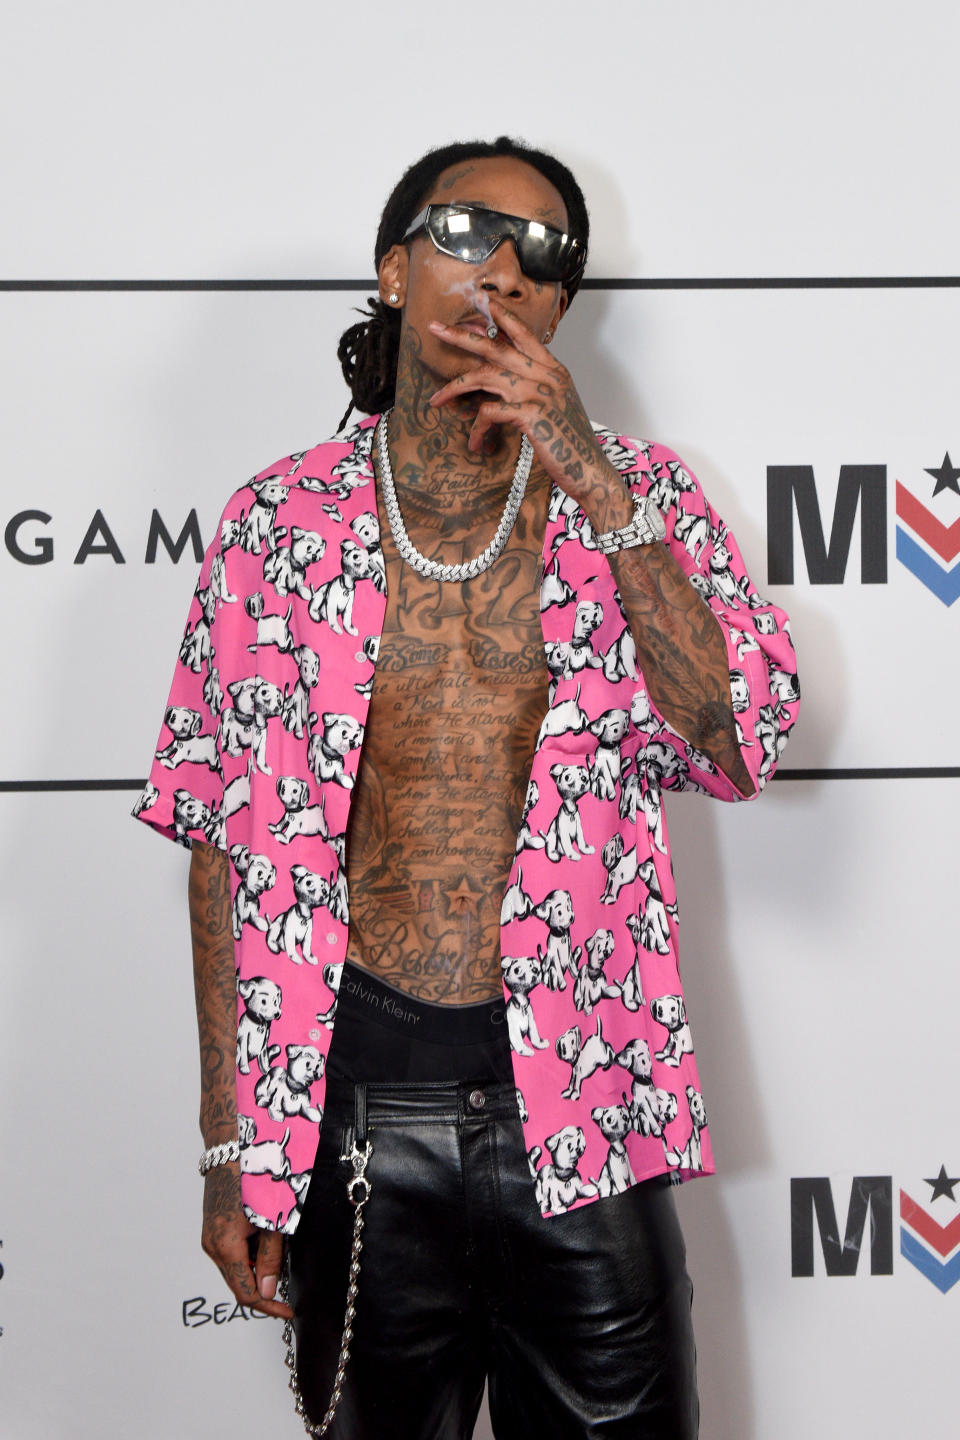 Wiz Khalifa in pink and white shirt, smoking with sunglasses on